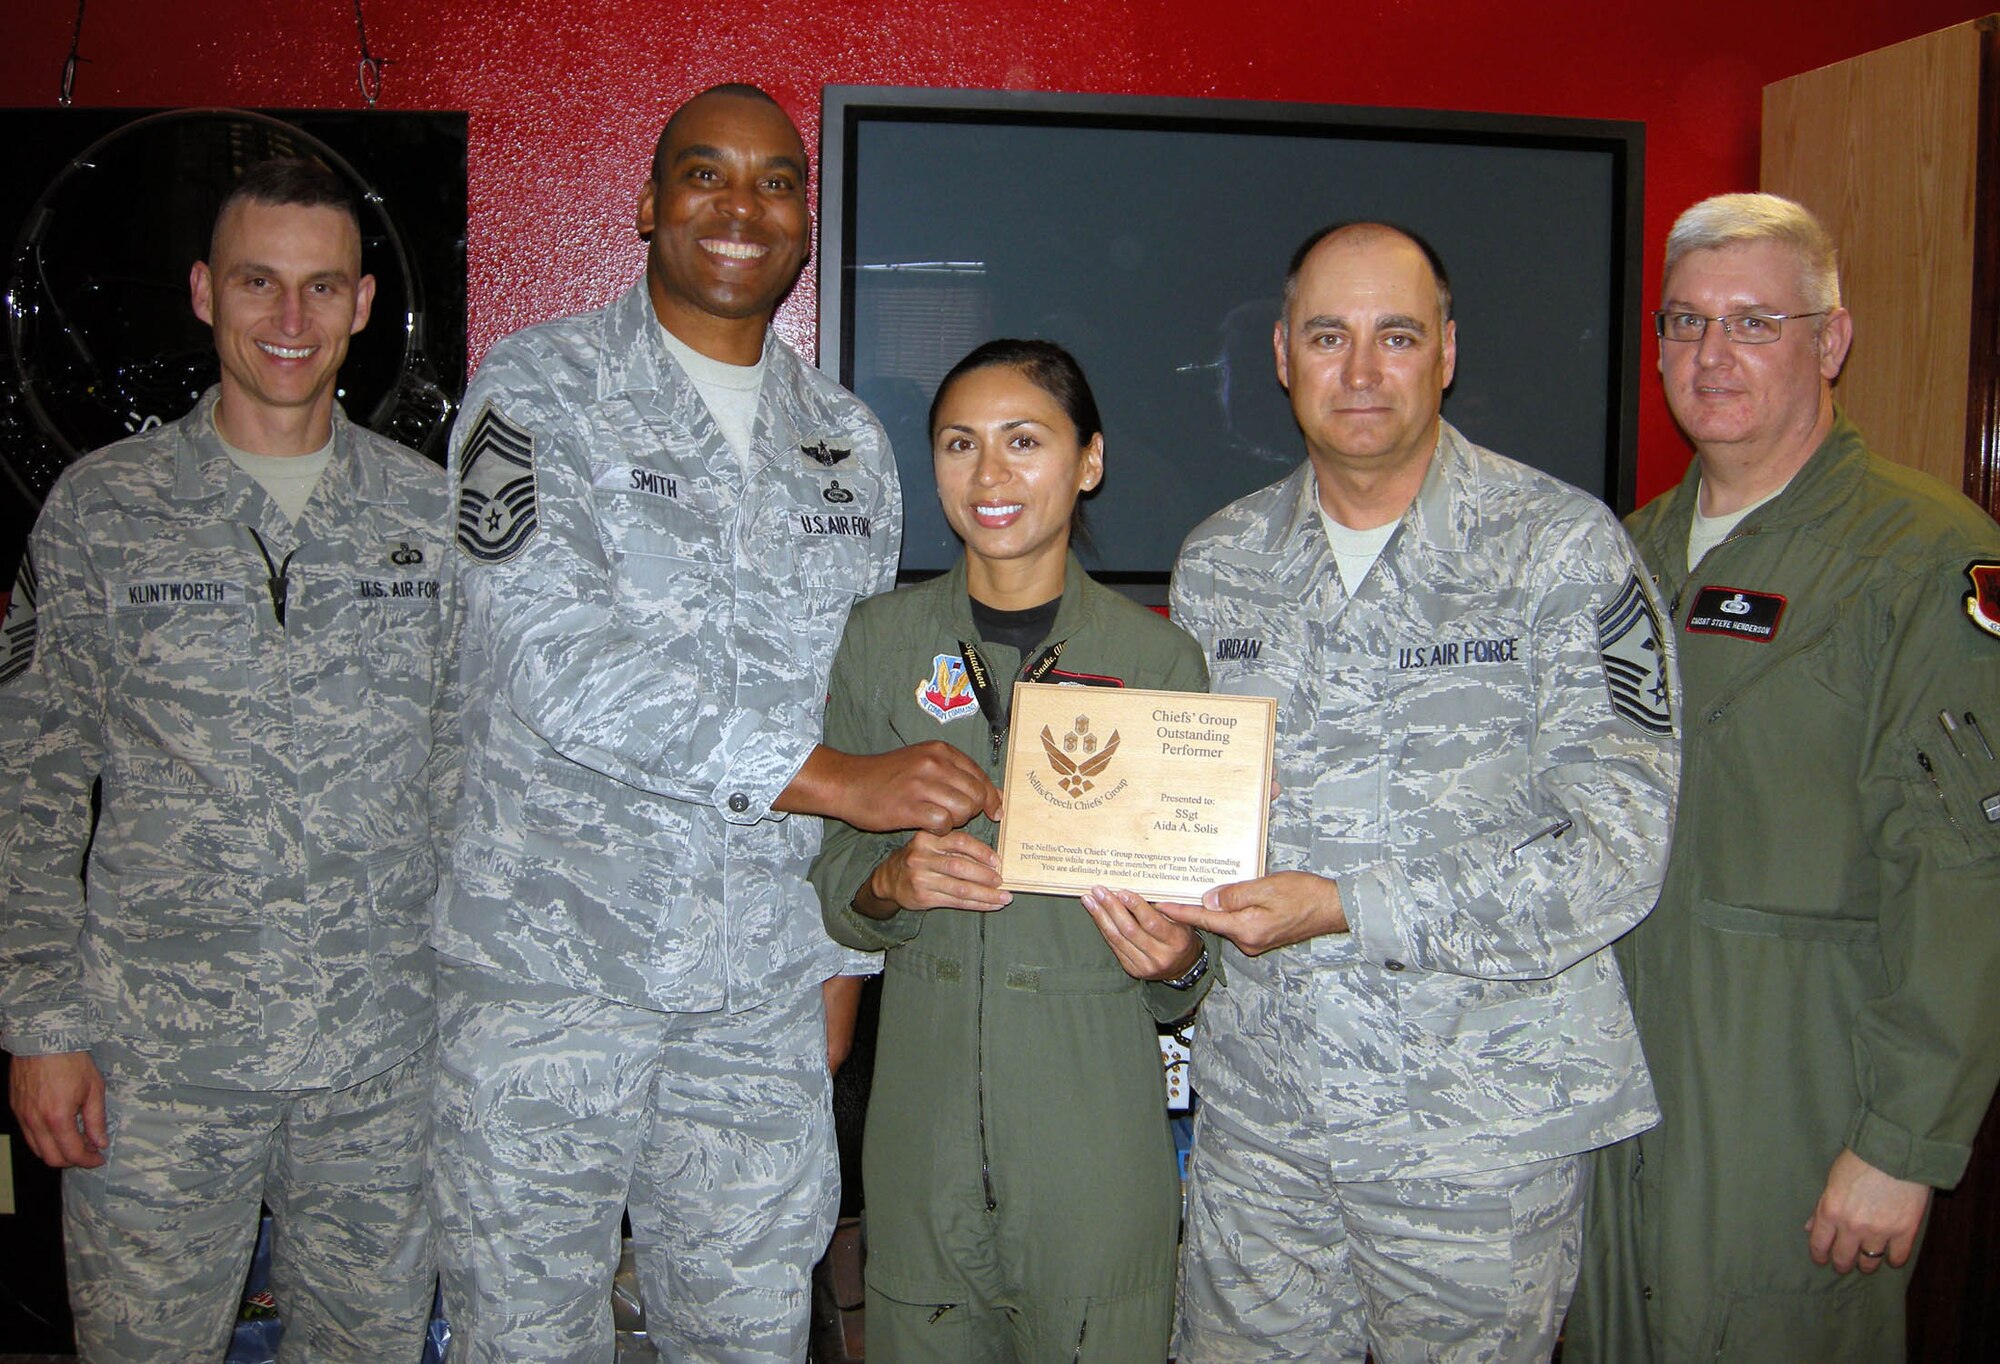 Staff Sgt. Solis (center), received an Excellence in Action award March 3. The award is presented monthly by the Chief's Group to deserving Airmen who have gone above and beyond the normal call of duty. (U.S. Air Force photo/Staff Sgt. Alice Moore)